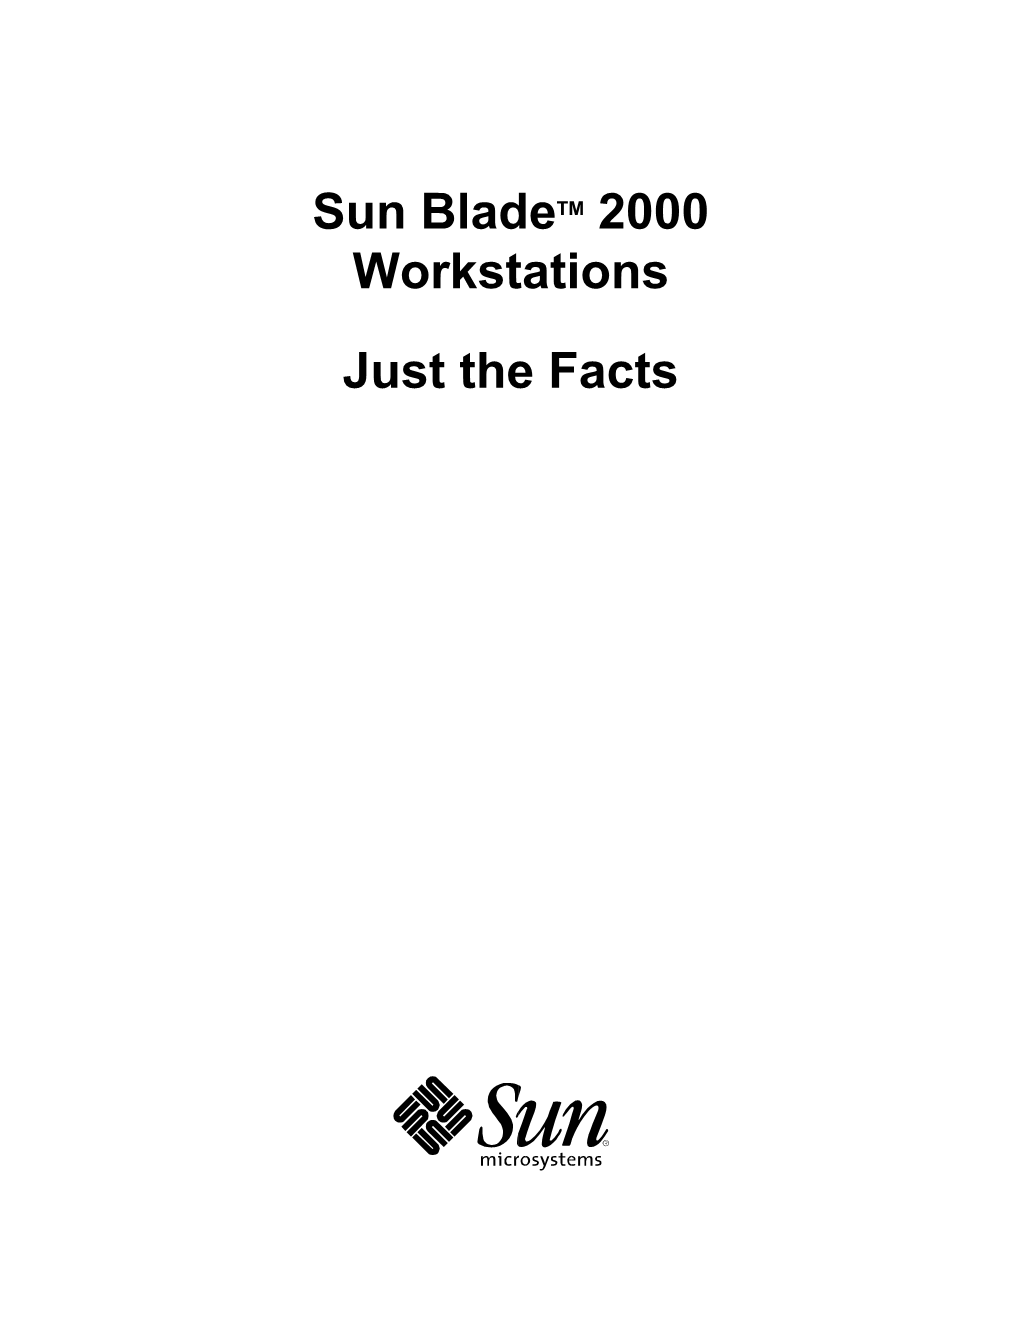 Sun Blade 1000 and 2000 Workstations Have Two UPA64S Slots to Allow "Dual-Headed" (Two Monitor) Sun Elite3d Graphics Operation